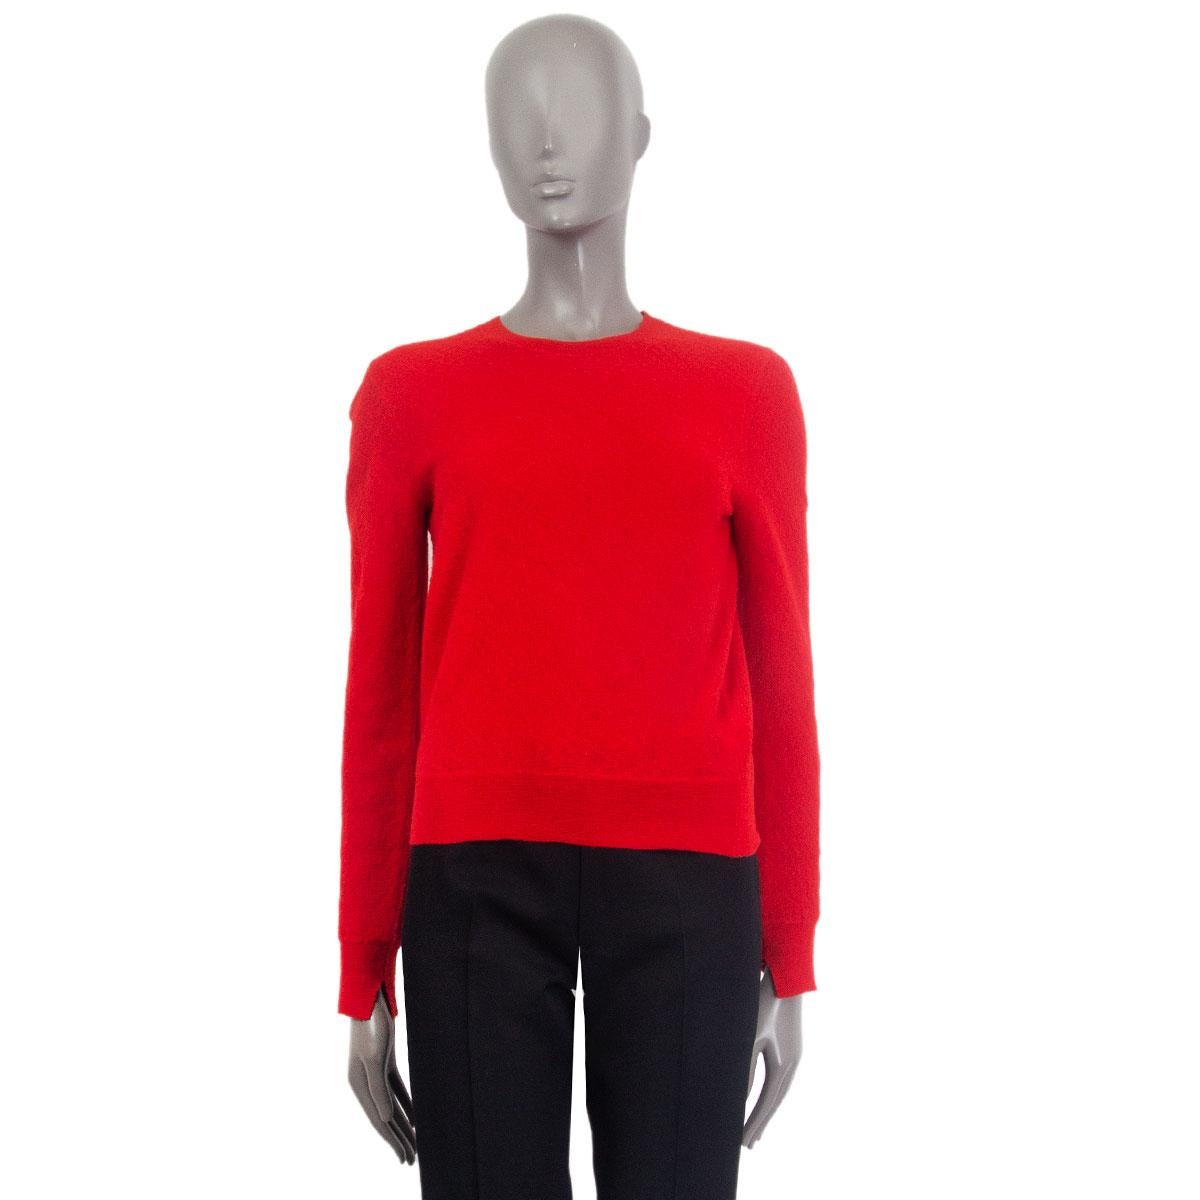 100% authentic Celine knit sweater in red wool (100%) with crew neck and long sleeves. Has been worn and is in excellent condition.

Tag Size L
Size L
Shoulder Width 37cm (14.4in)
Bust 90cm (35.1in)
Waist 82cm (32in)
Length 52cm (20.3in)
Side Seam